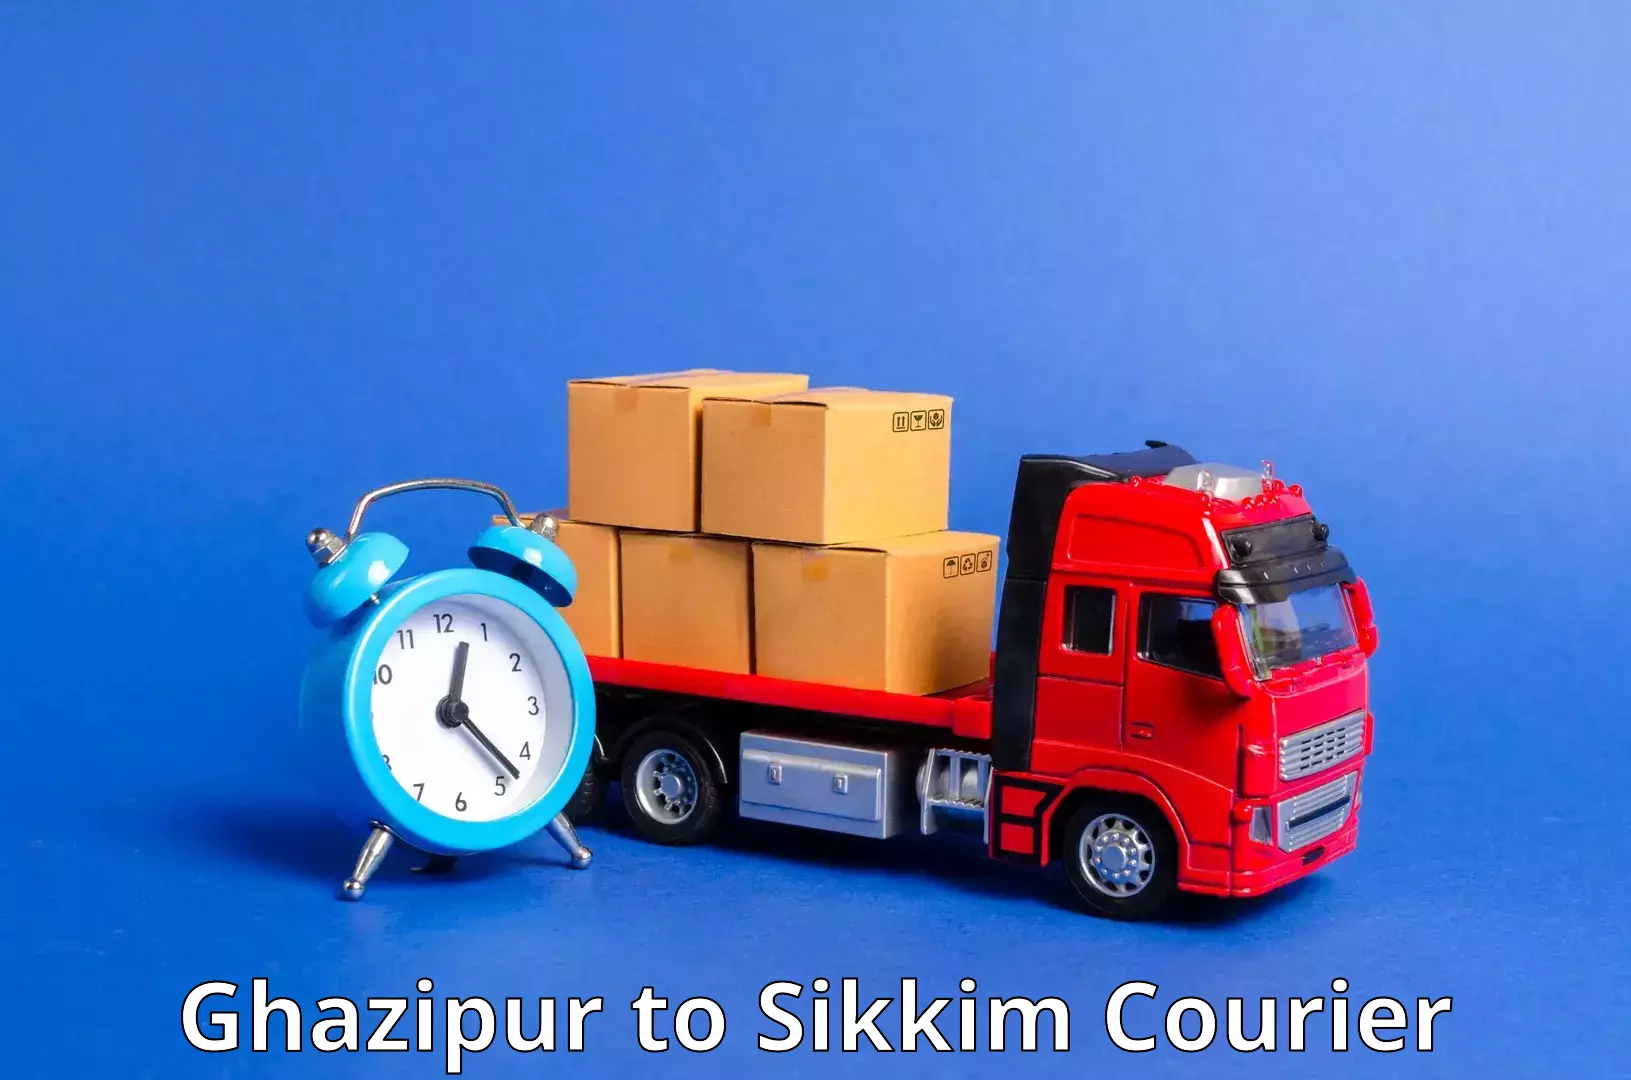 Nationwide parcel services Ghazipur to Pelling